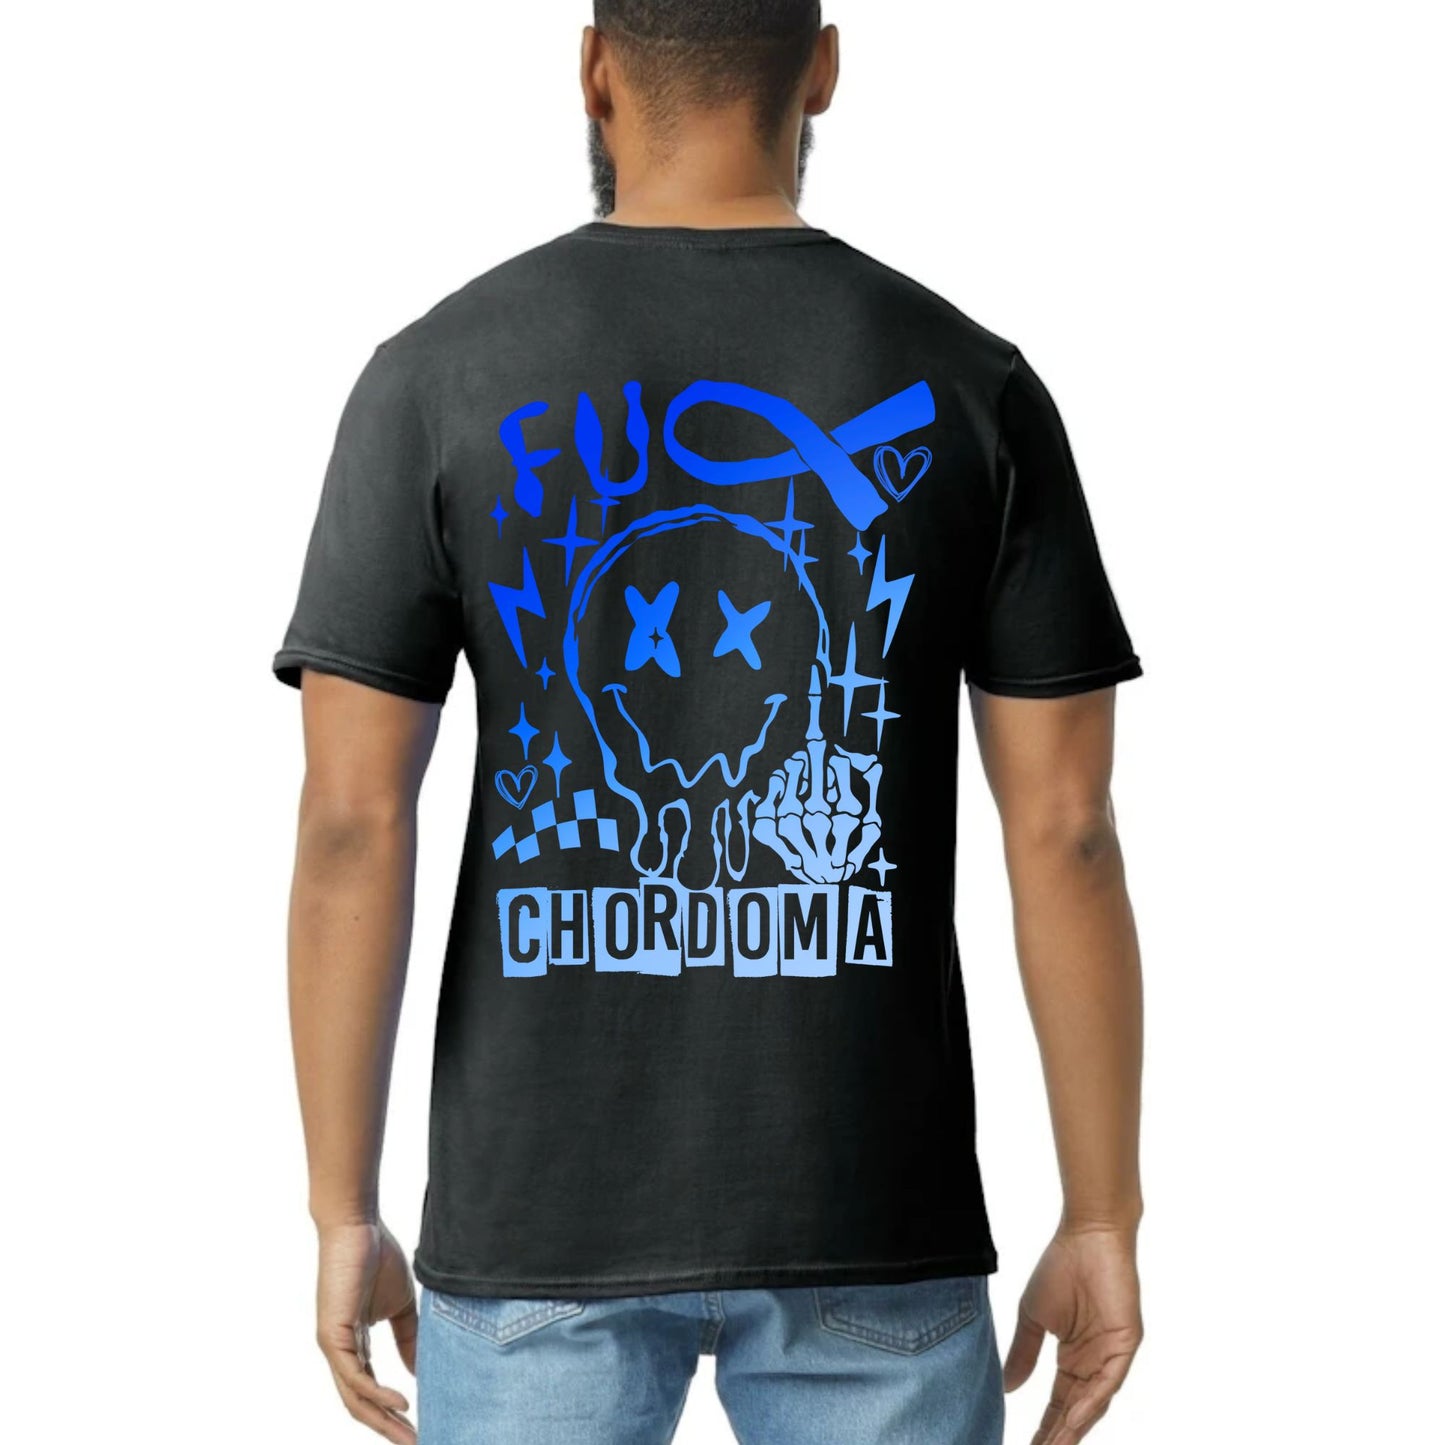 F*CK CHORDOMA (Millie’s Campaign)